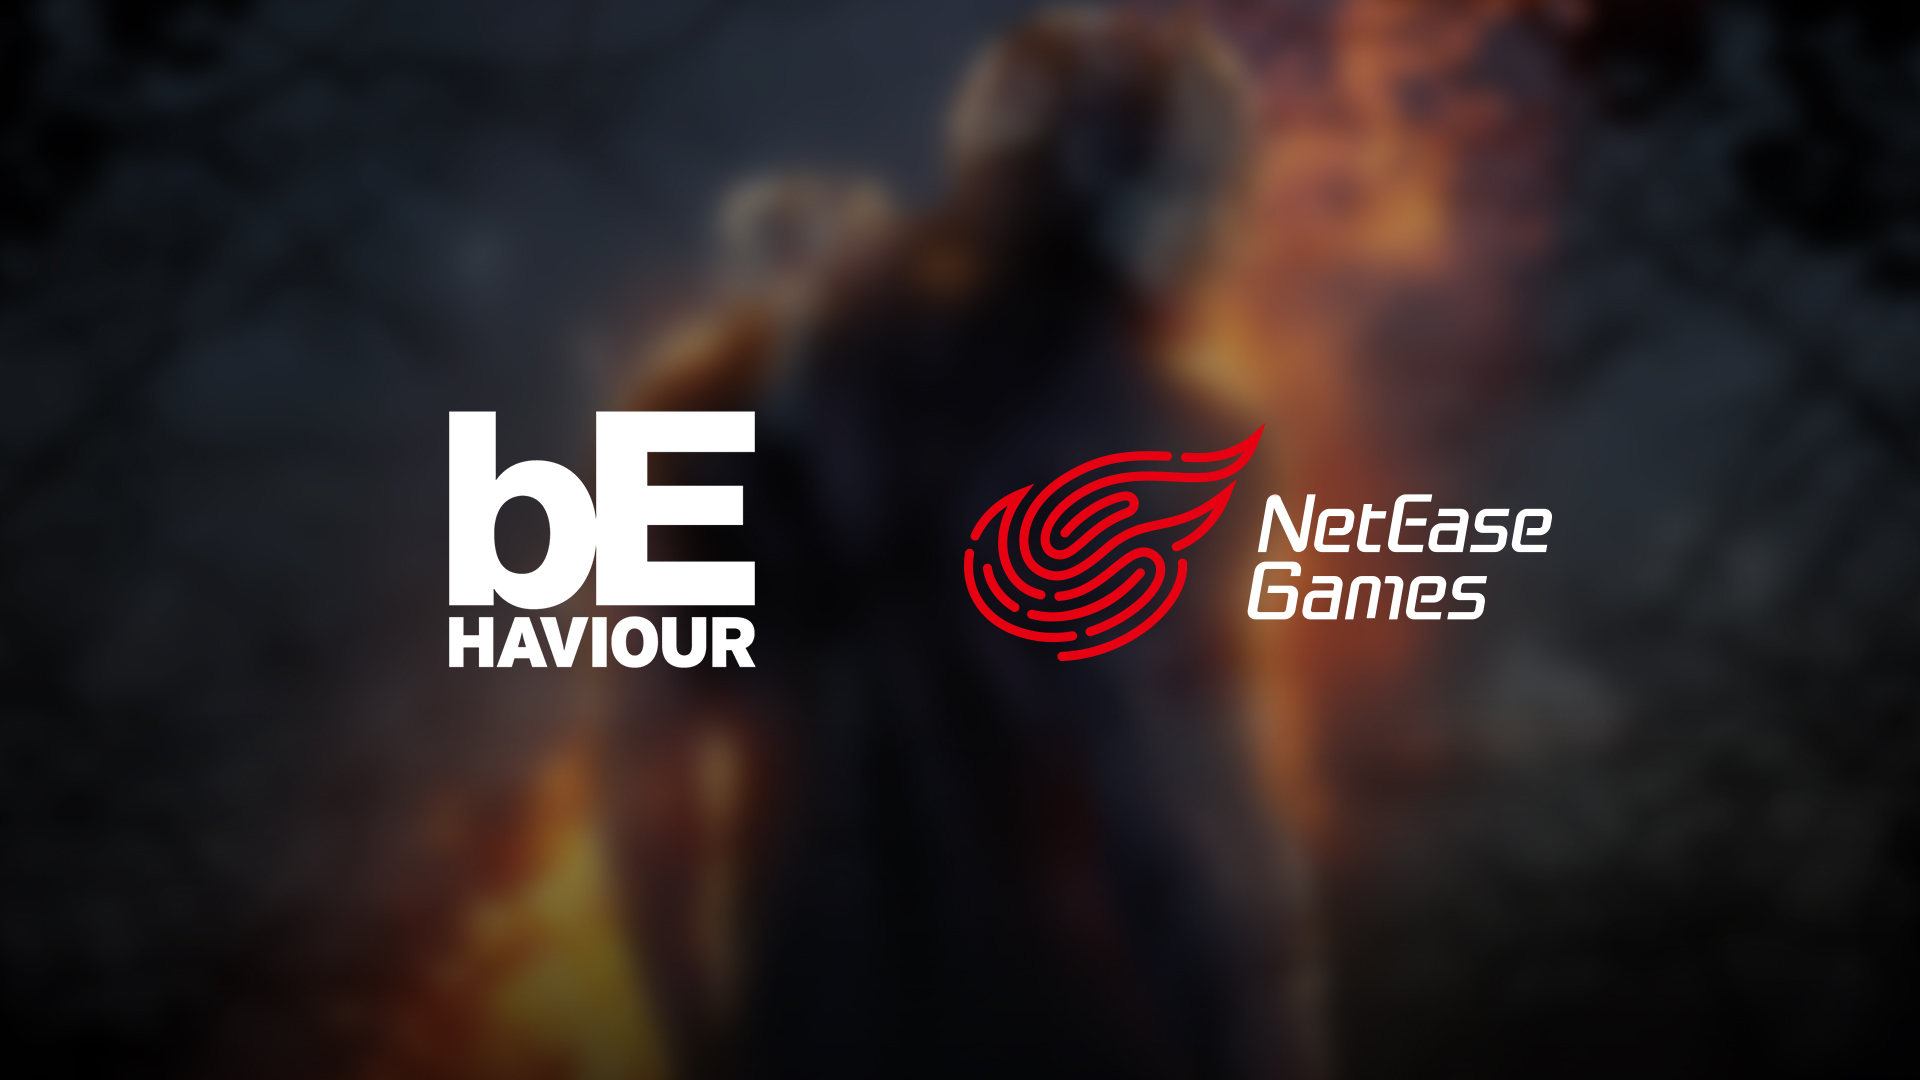 NetEase Games to Partner with Behaviour™ Interactive to Publish Dead by Daylight™ Mobile in Southeast Asia